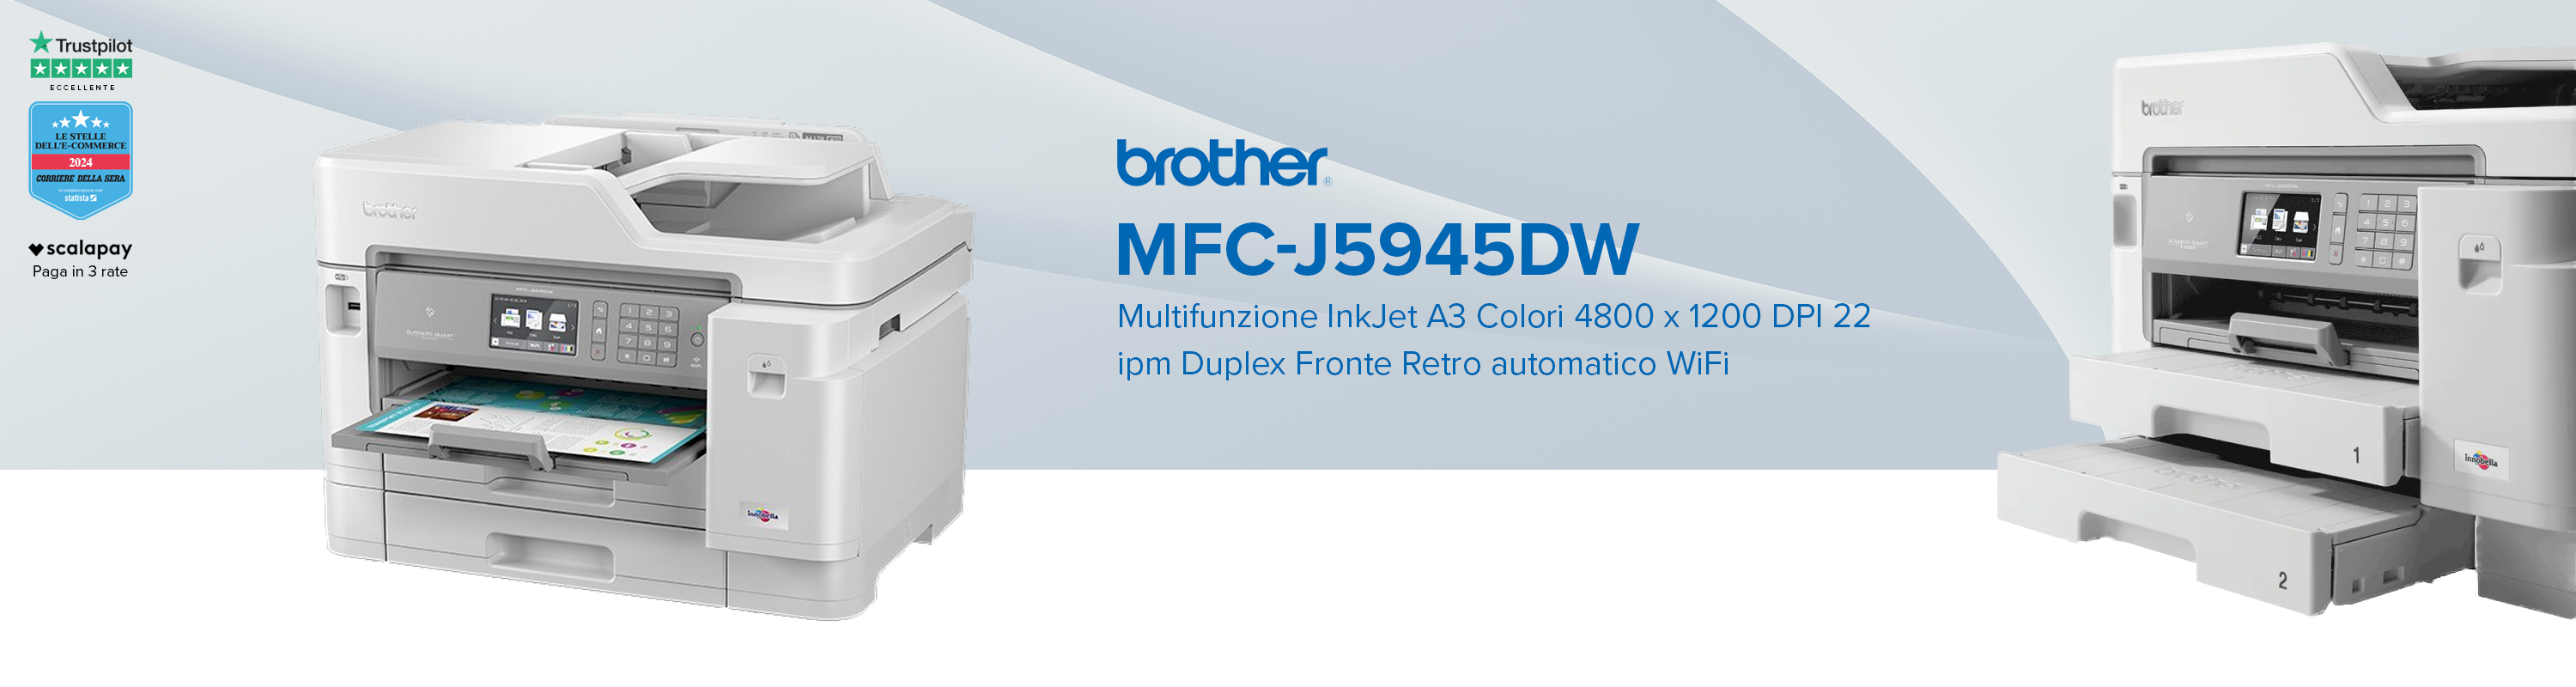 Brother MFC-J5945DW